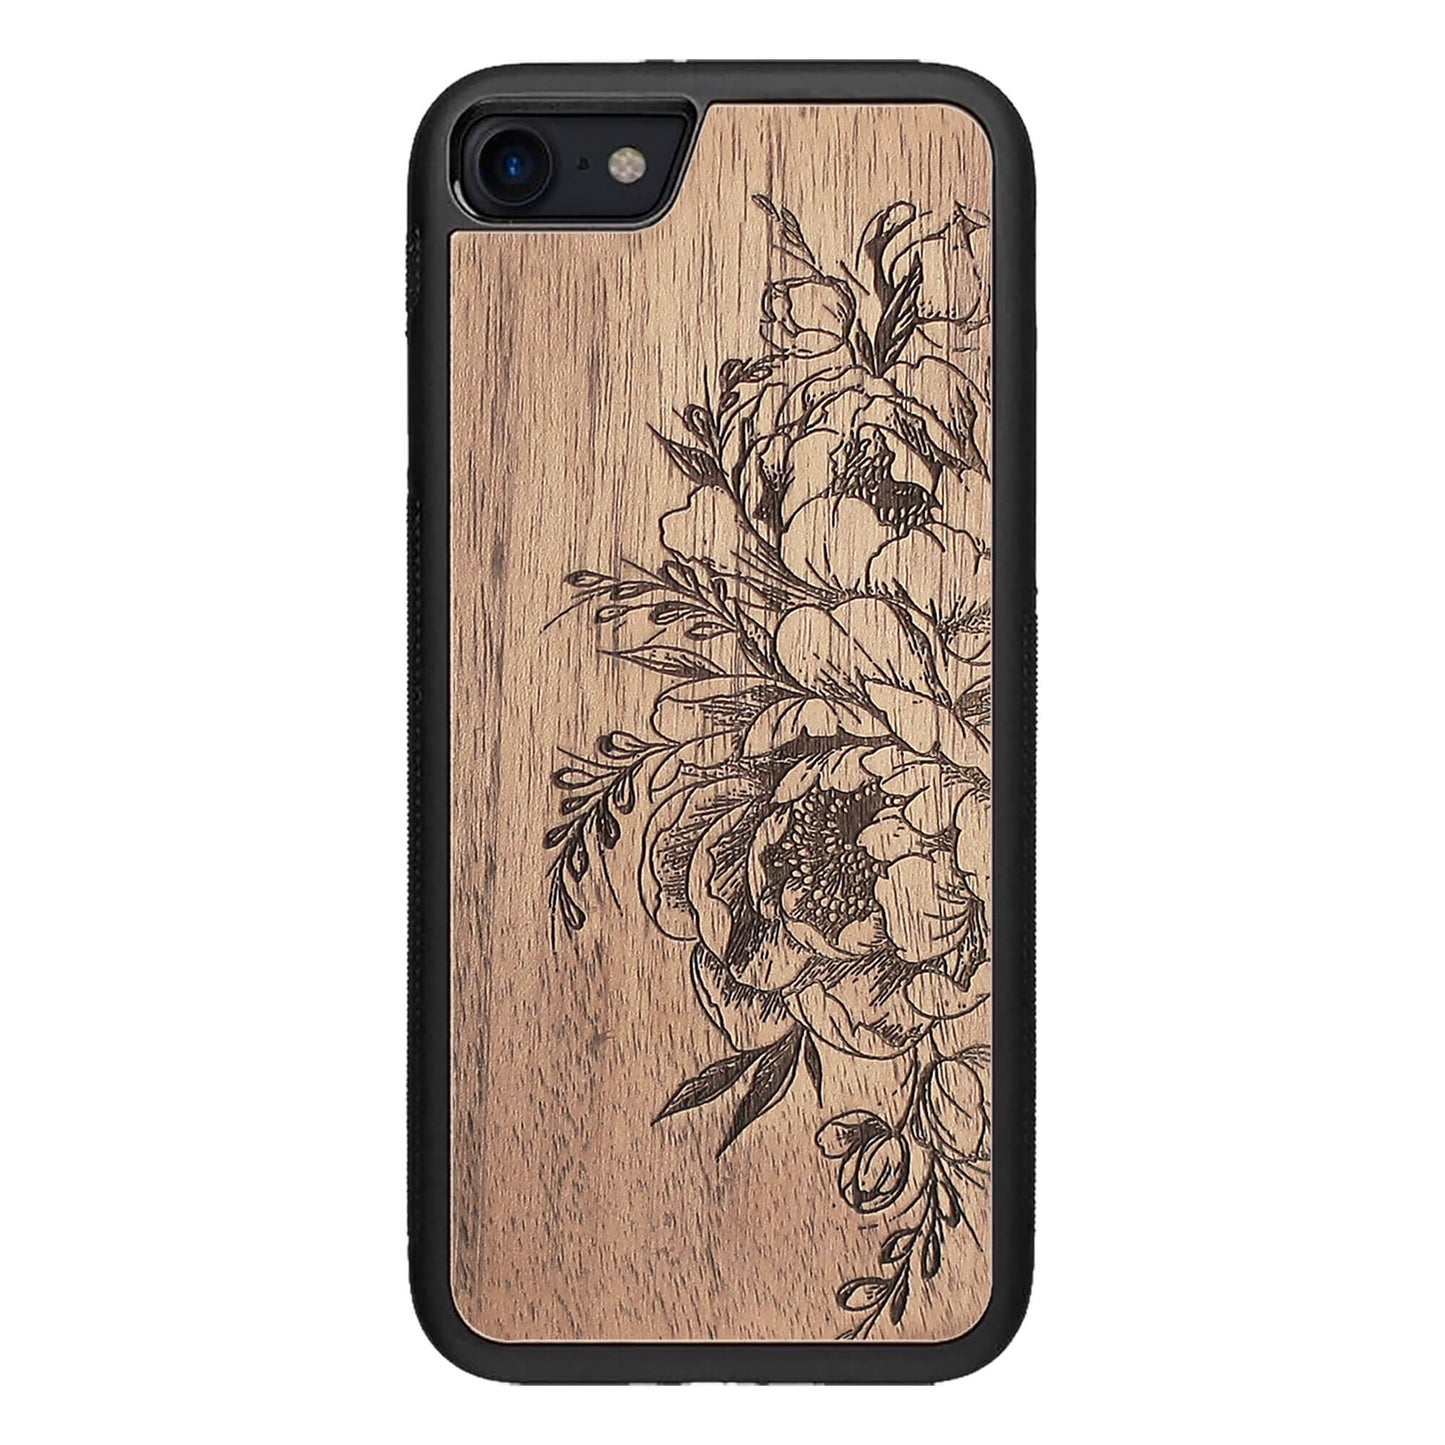 Wooden Case for iPhone SE 3 generation case Flowers